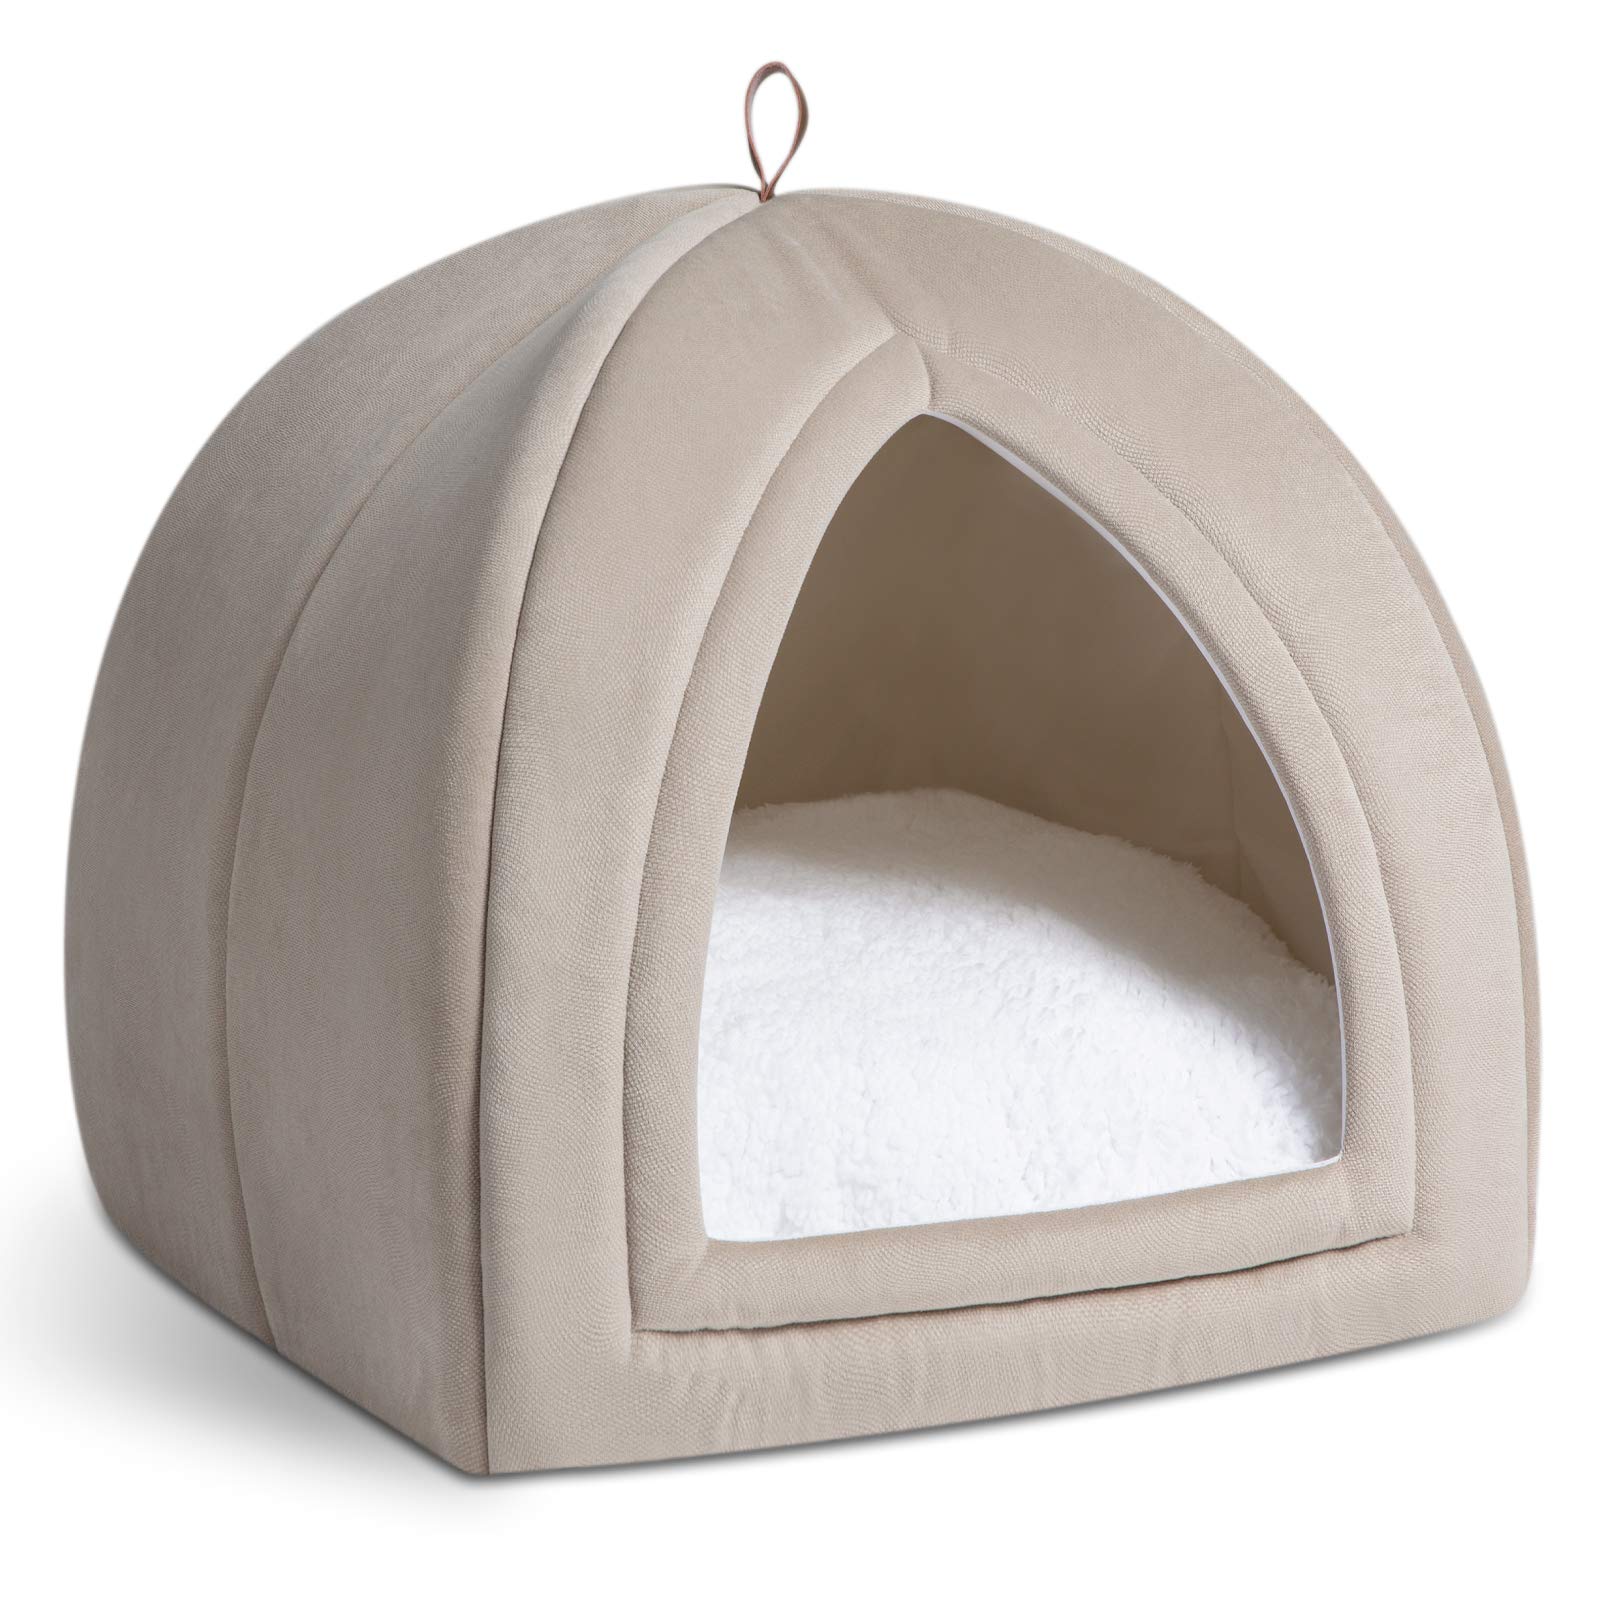 19" Bedsure Comfy Pet Tent Bed w/ Removable Washable Pillow (Dark Beige) $17 + Free Shipping